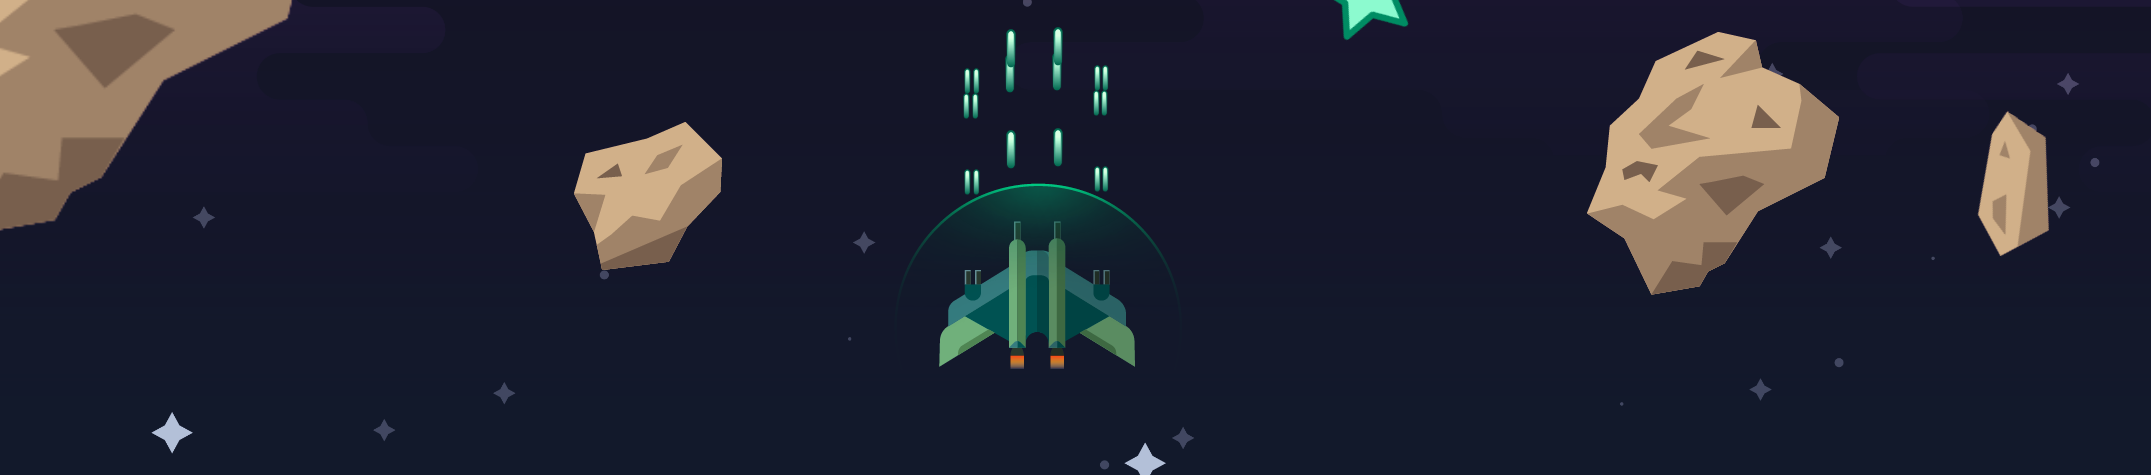 Sparkly Space Shooter